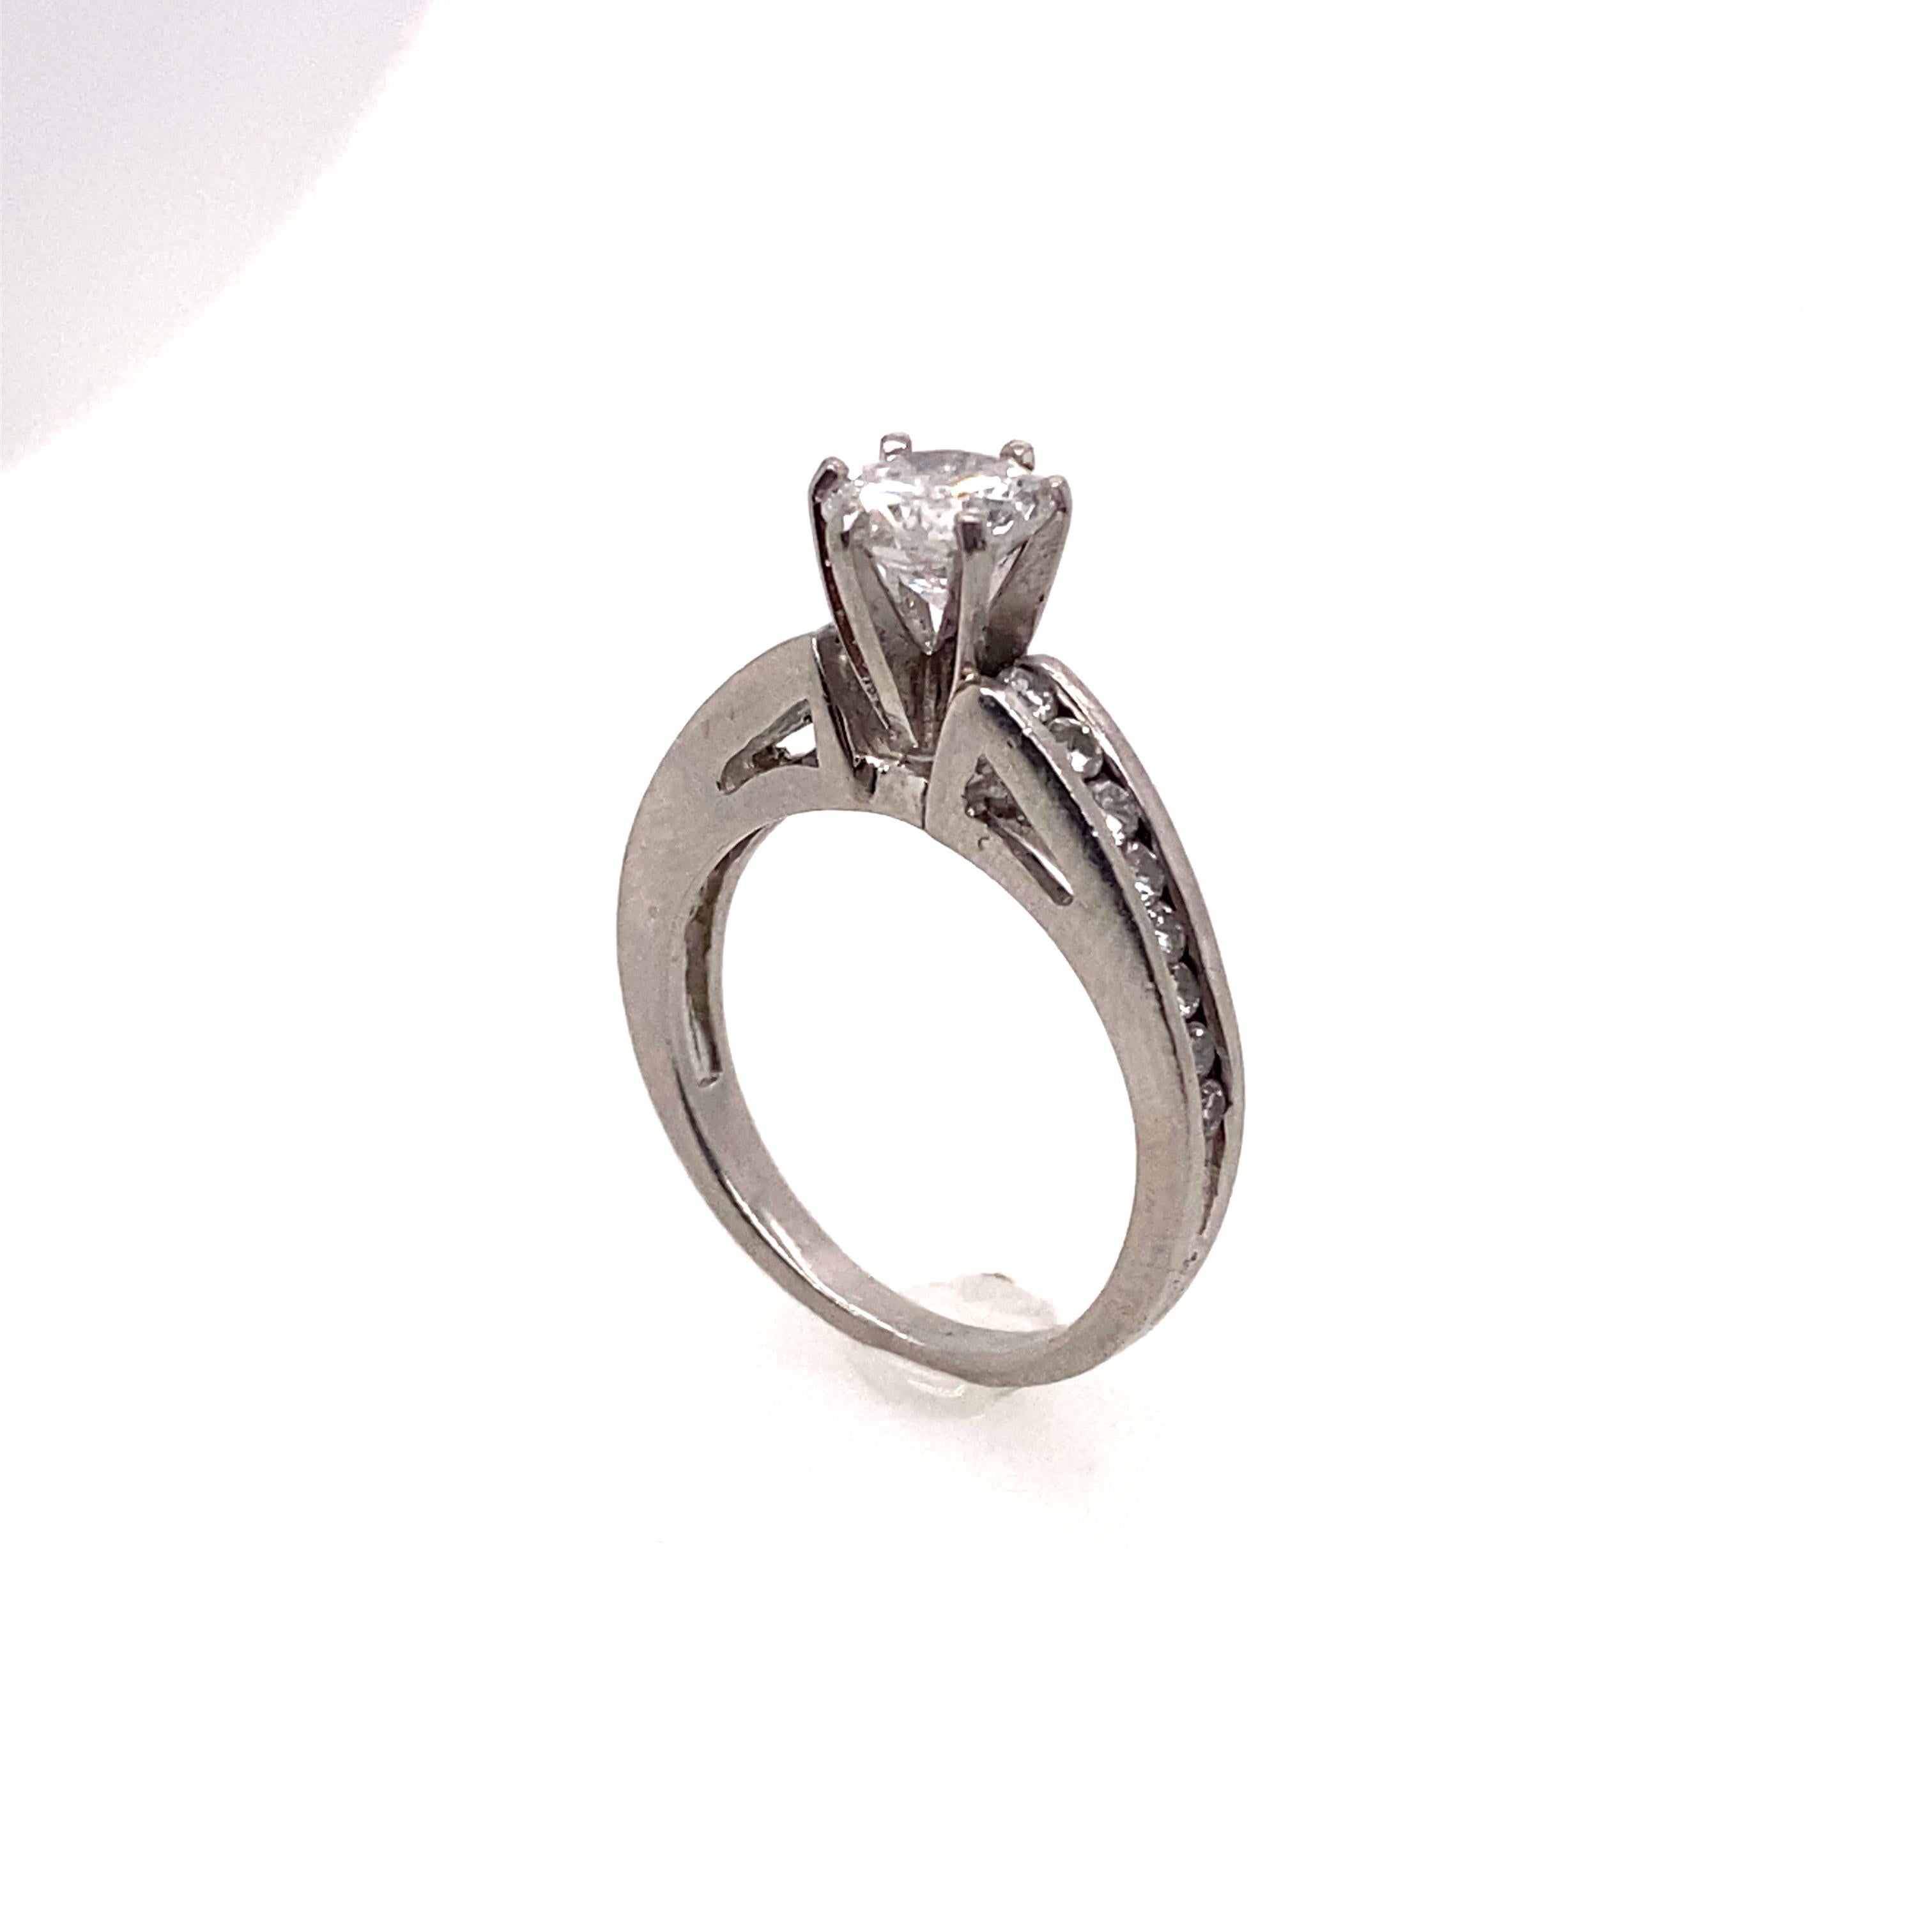 The brilliant round cut diamond 0.80 carat is set as a center stone in the platinum ring. The shank of the ring is also set with fourteen side diamonds. This ring is perfect for the solitaire diamond ring lovers.
 
Center Diamond Weight: 0.80